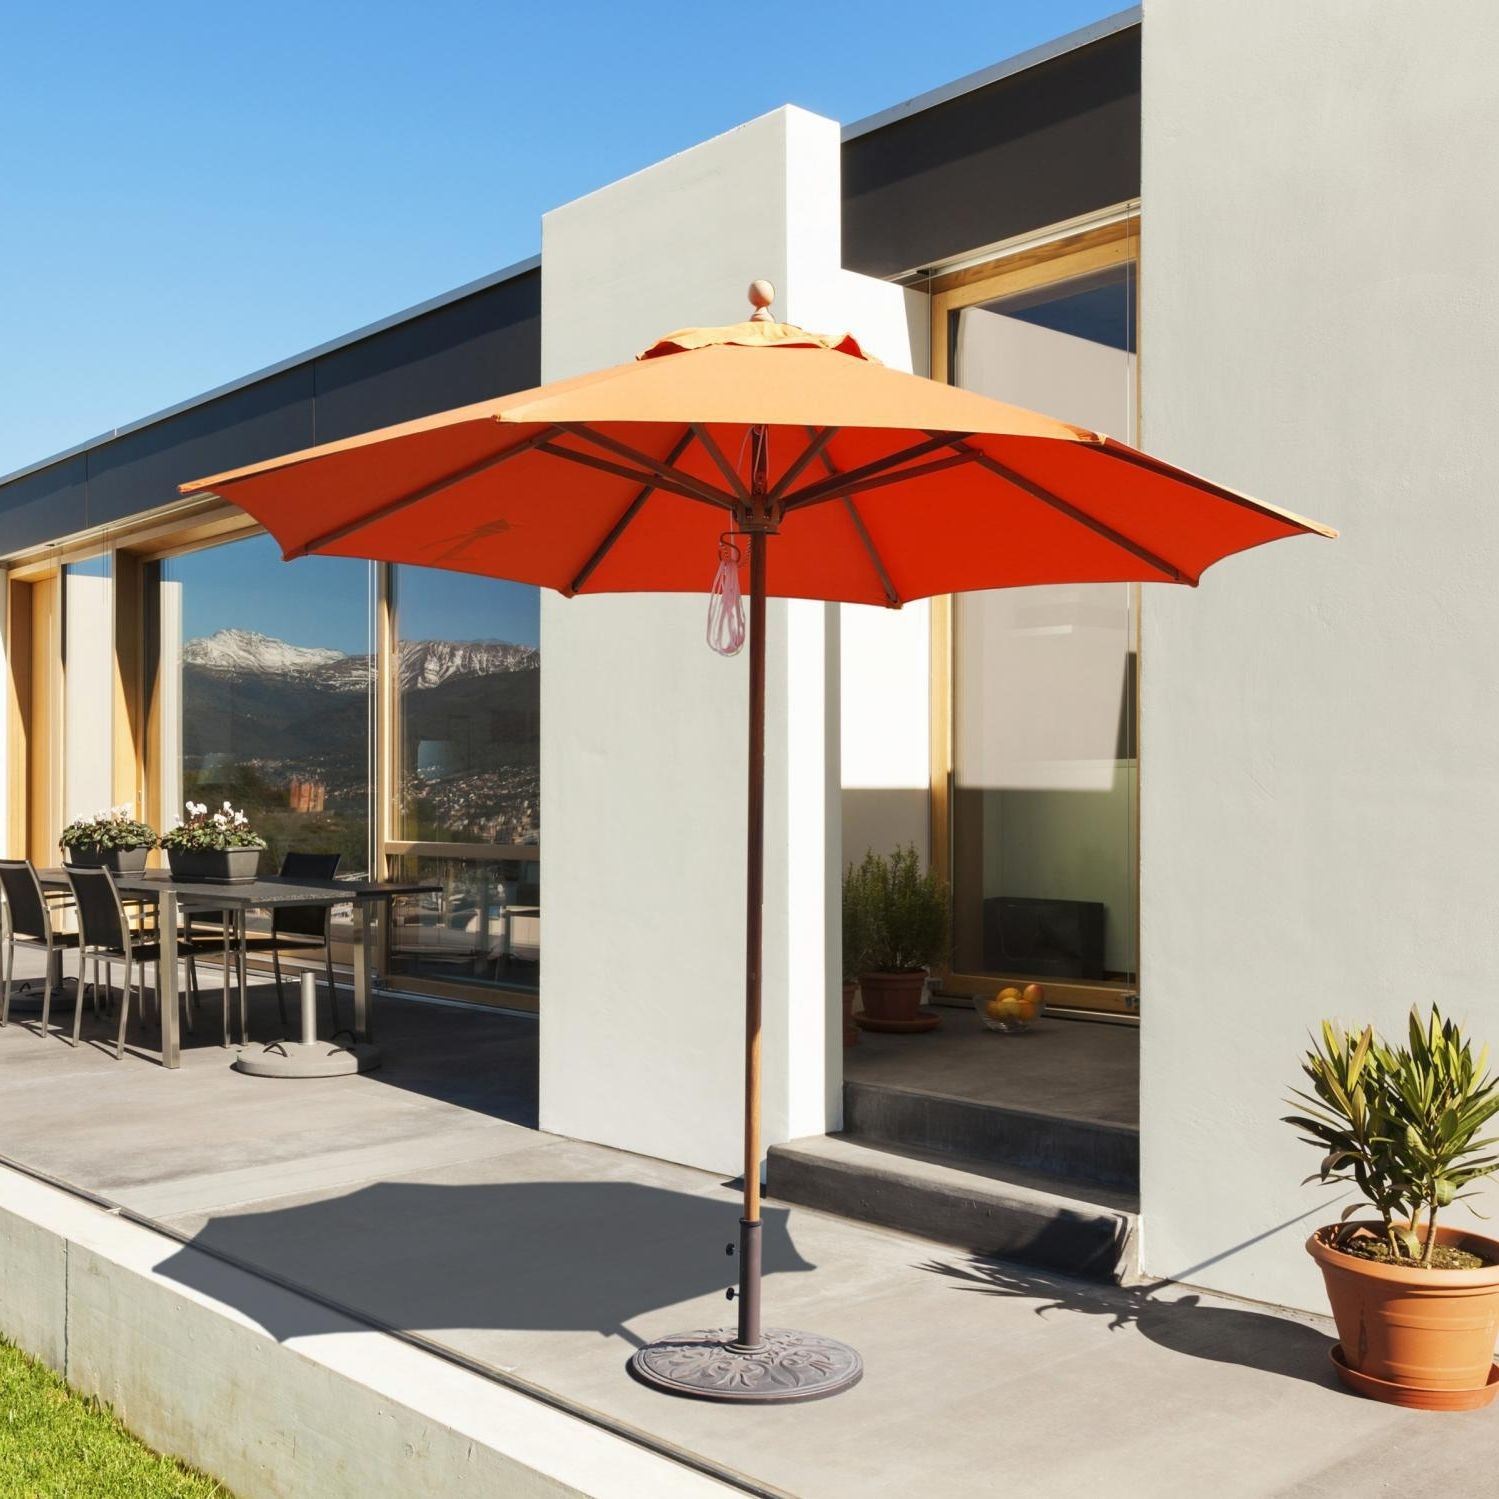 Galtech 9 Ft Teak Patio Umbrella With Pulley Lift : Ultimate Patio Intended For Best And Newest 9 Ft Patio Umbrellas (View 20 of 20)